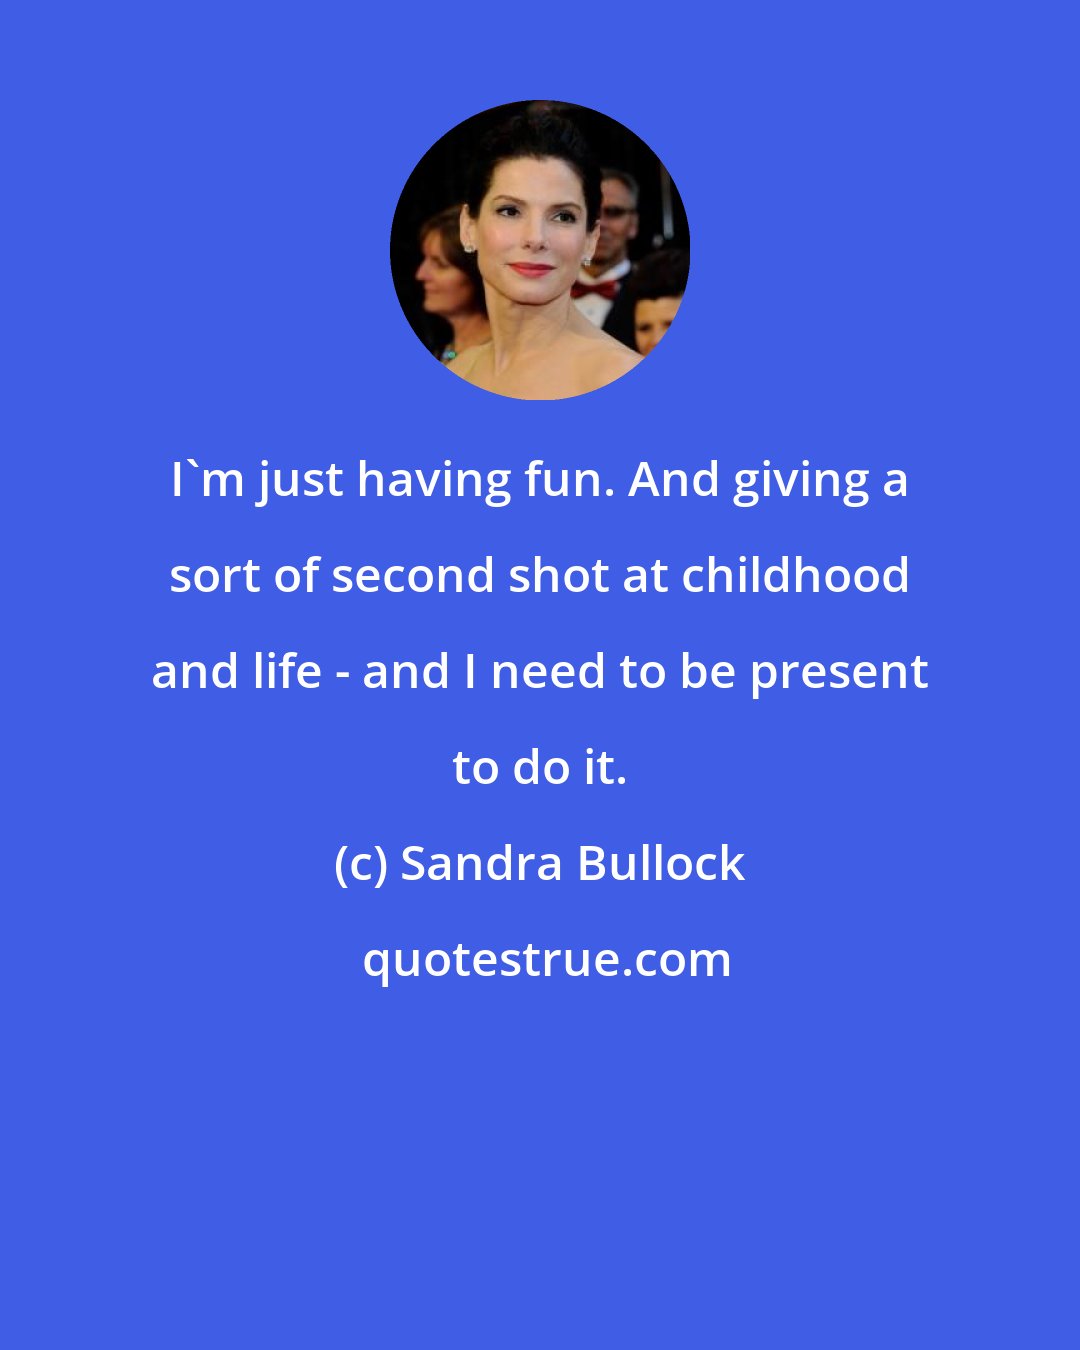 Sandra Bullock: I'm just having fun. And giving a sort of second shot at childhood and life - and I need to be present to do it.